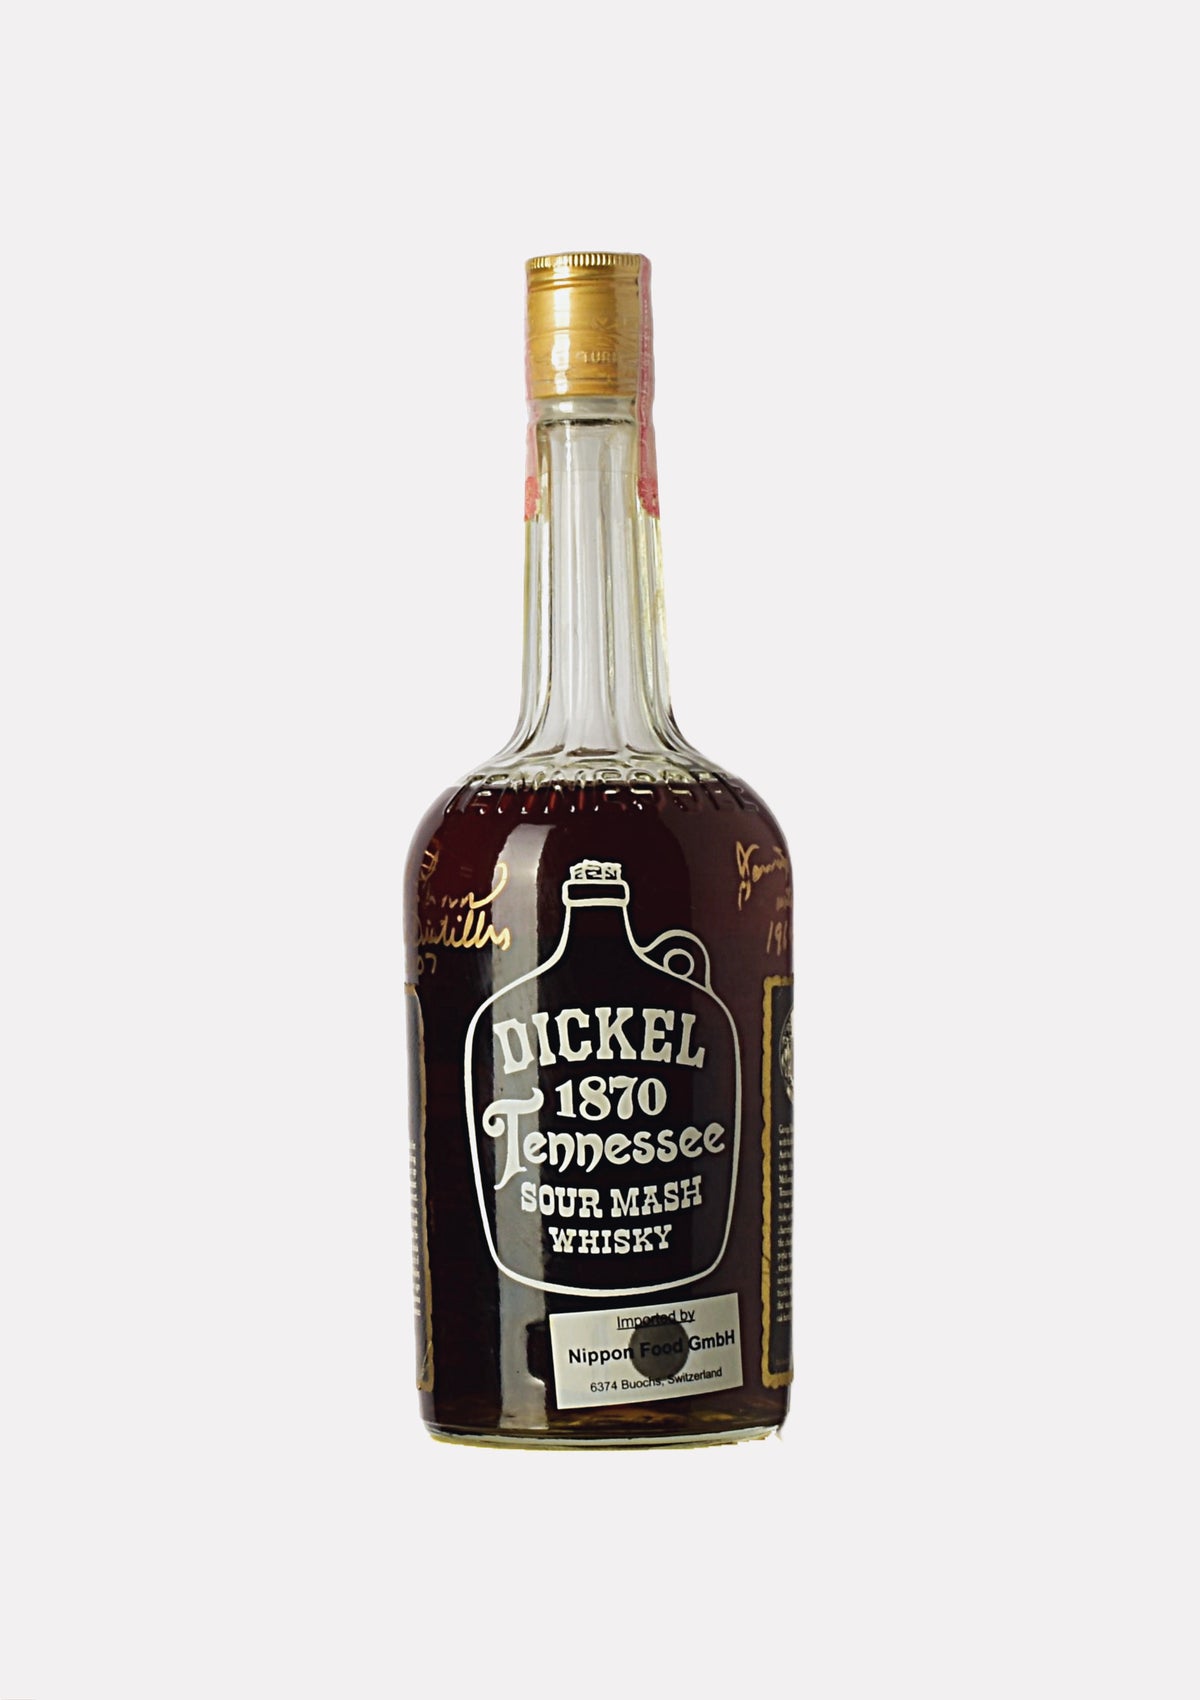 George Dickel Tennessee Sour Mash Whisky Old No. 8 Brand